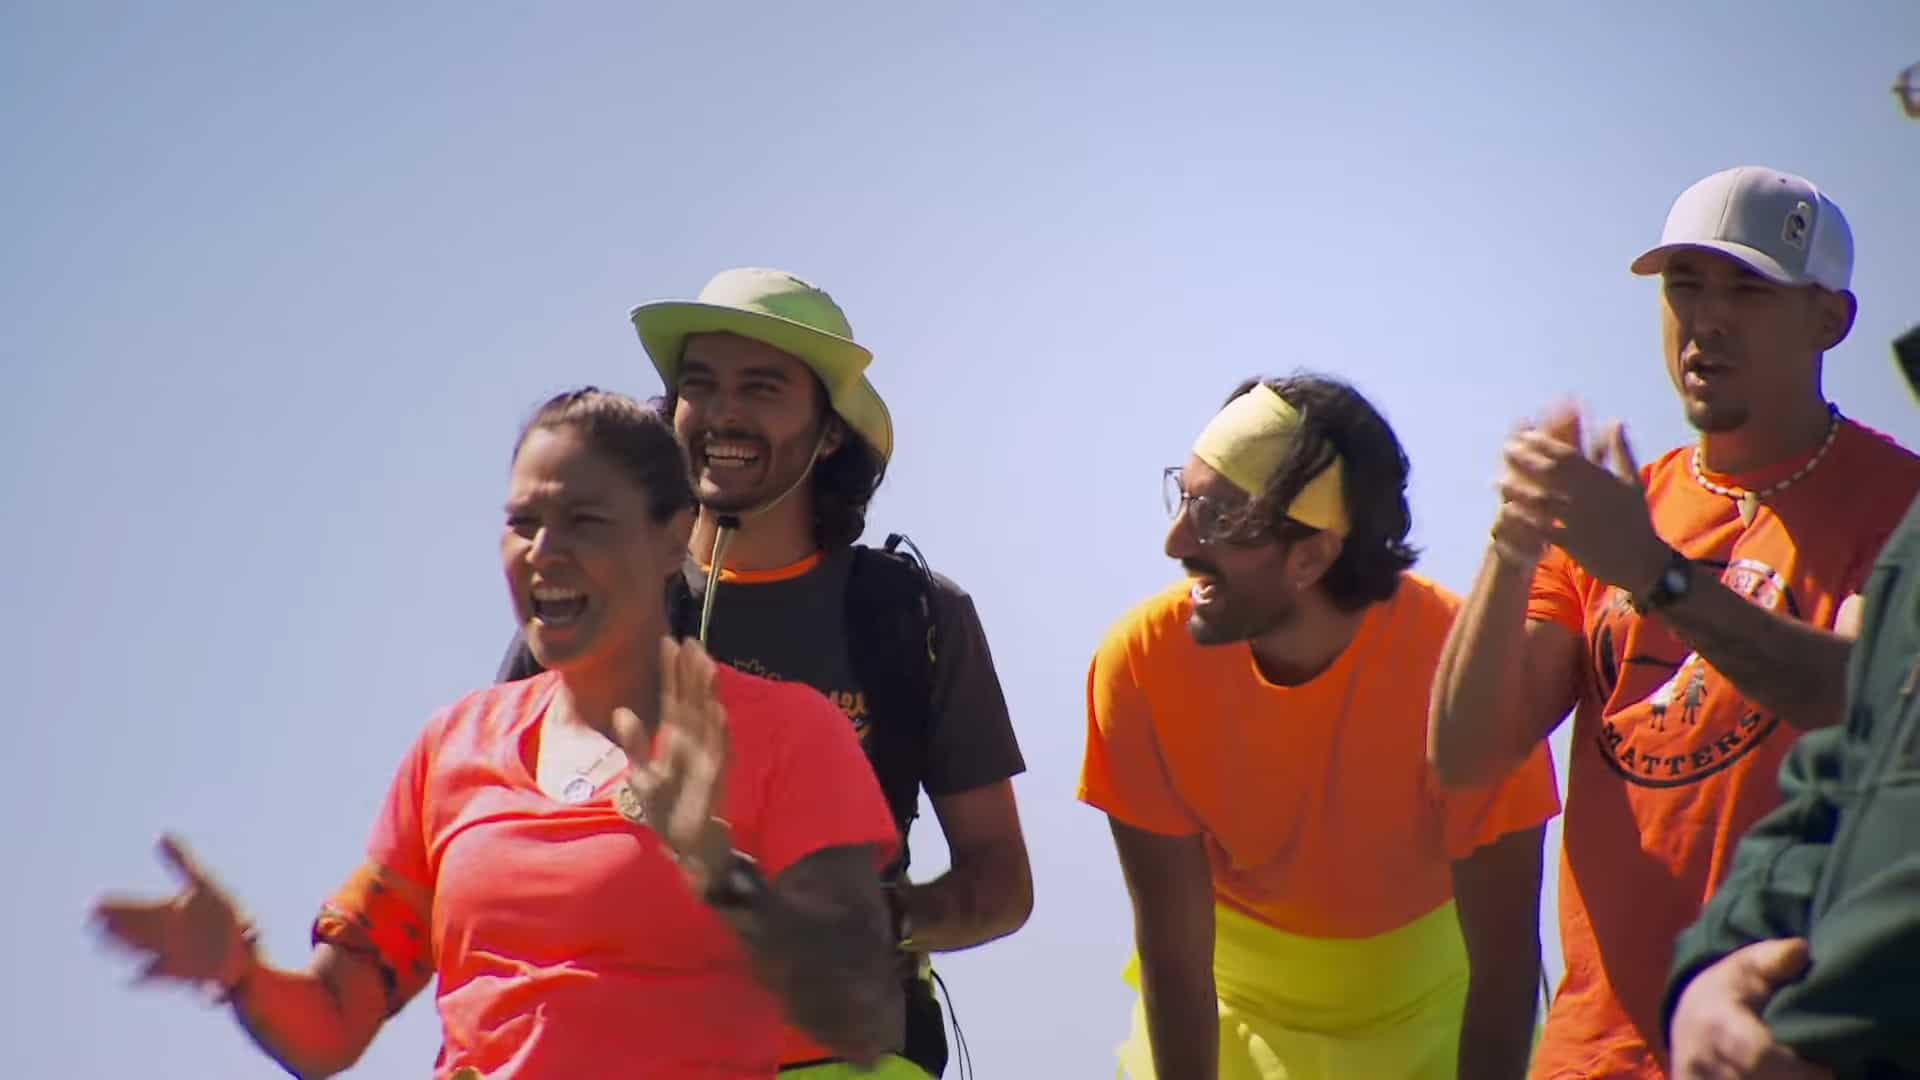 The Amazing Race Canada Season 9 Episode 9: Release Date, Spoilers, and Streaming Guide